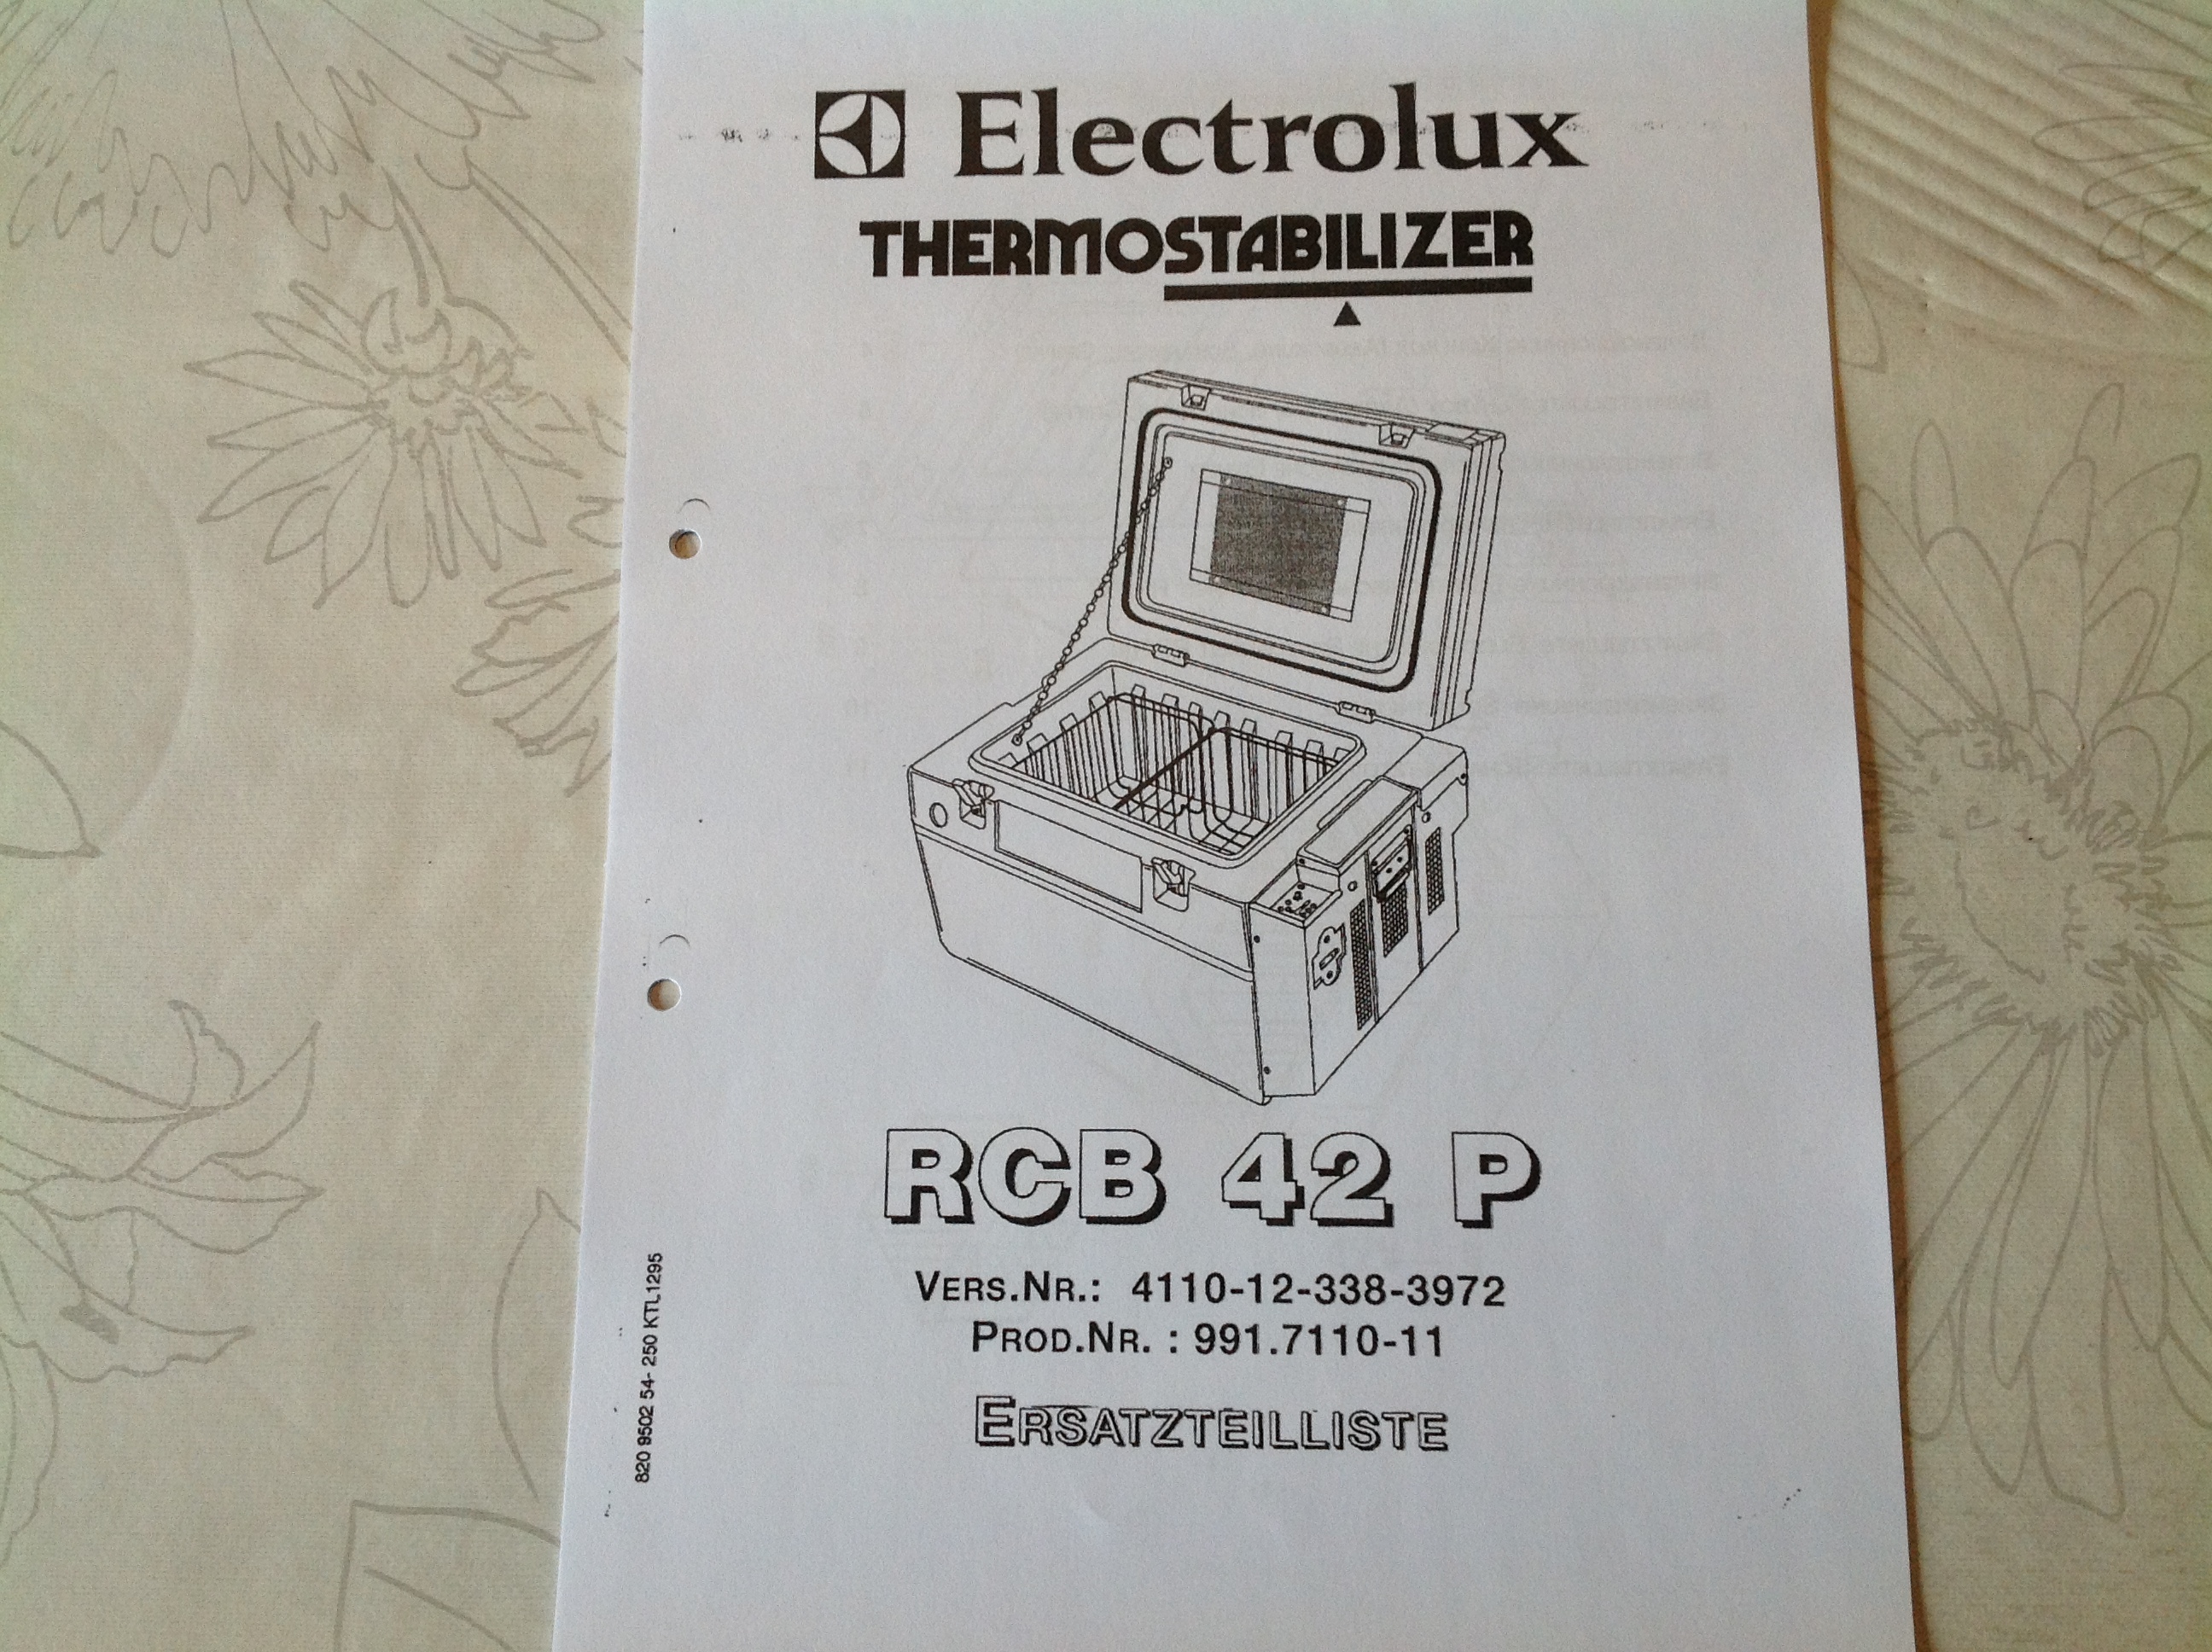 Electrolux Thermo Stabilizer RCB 42 P